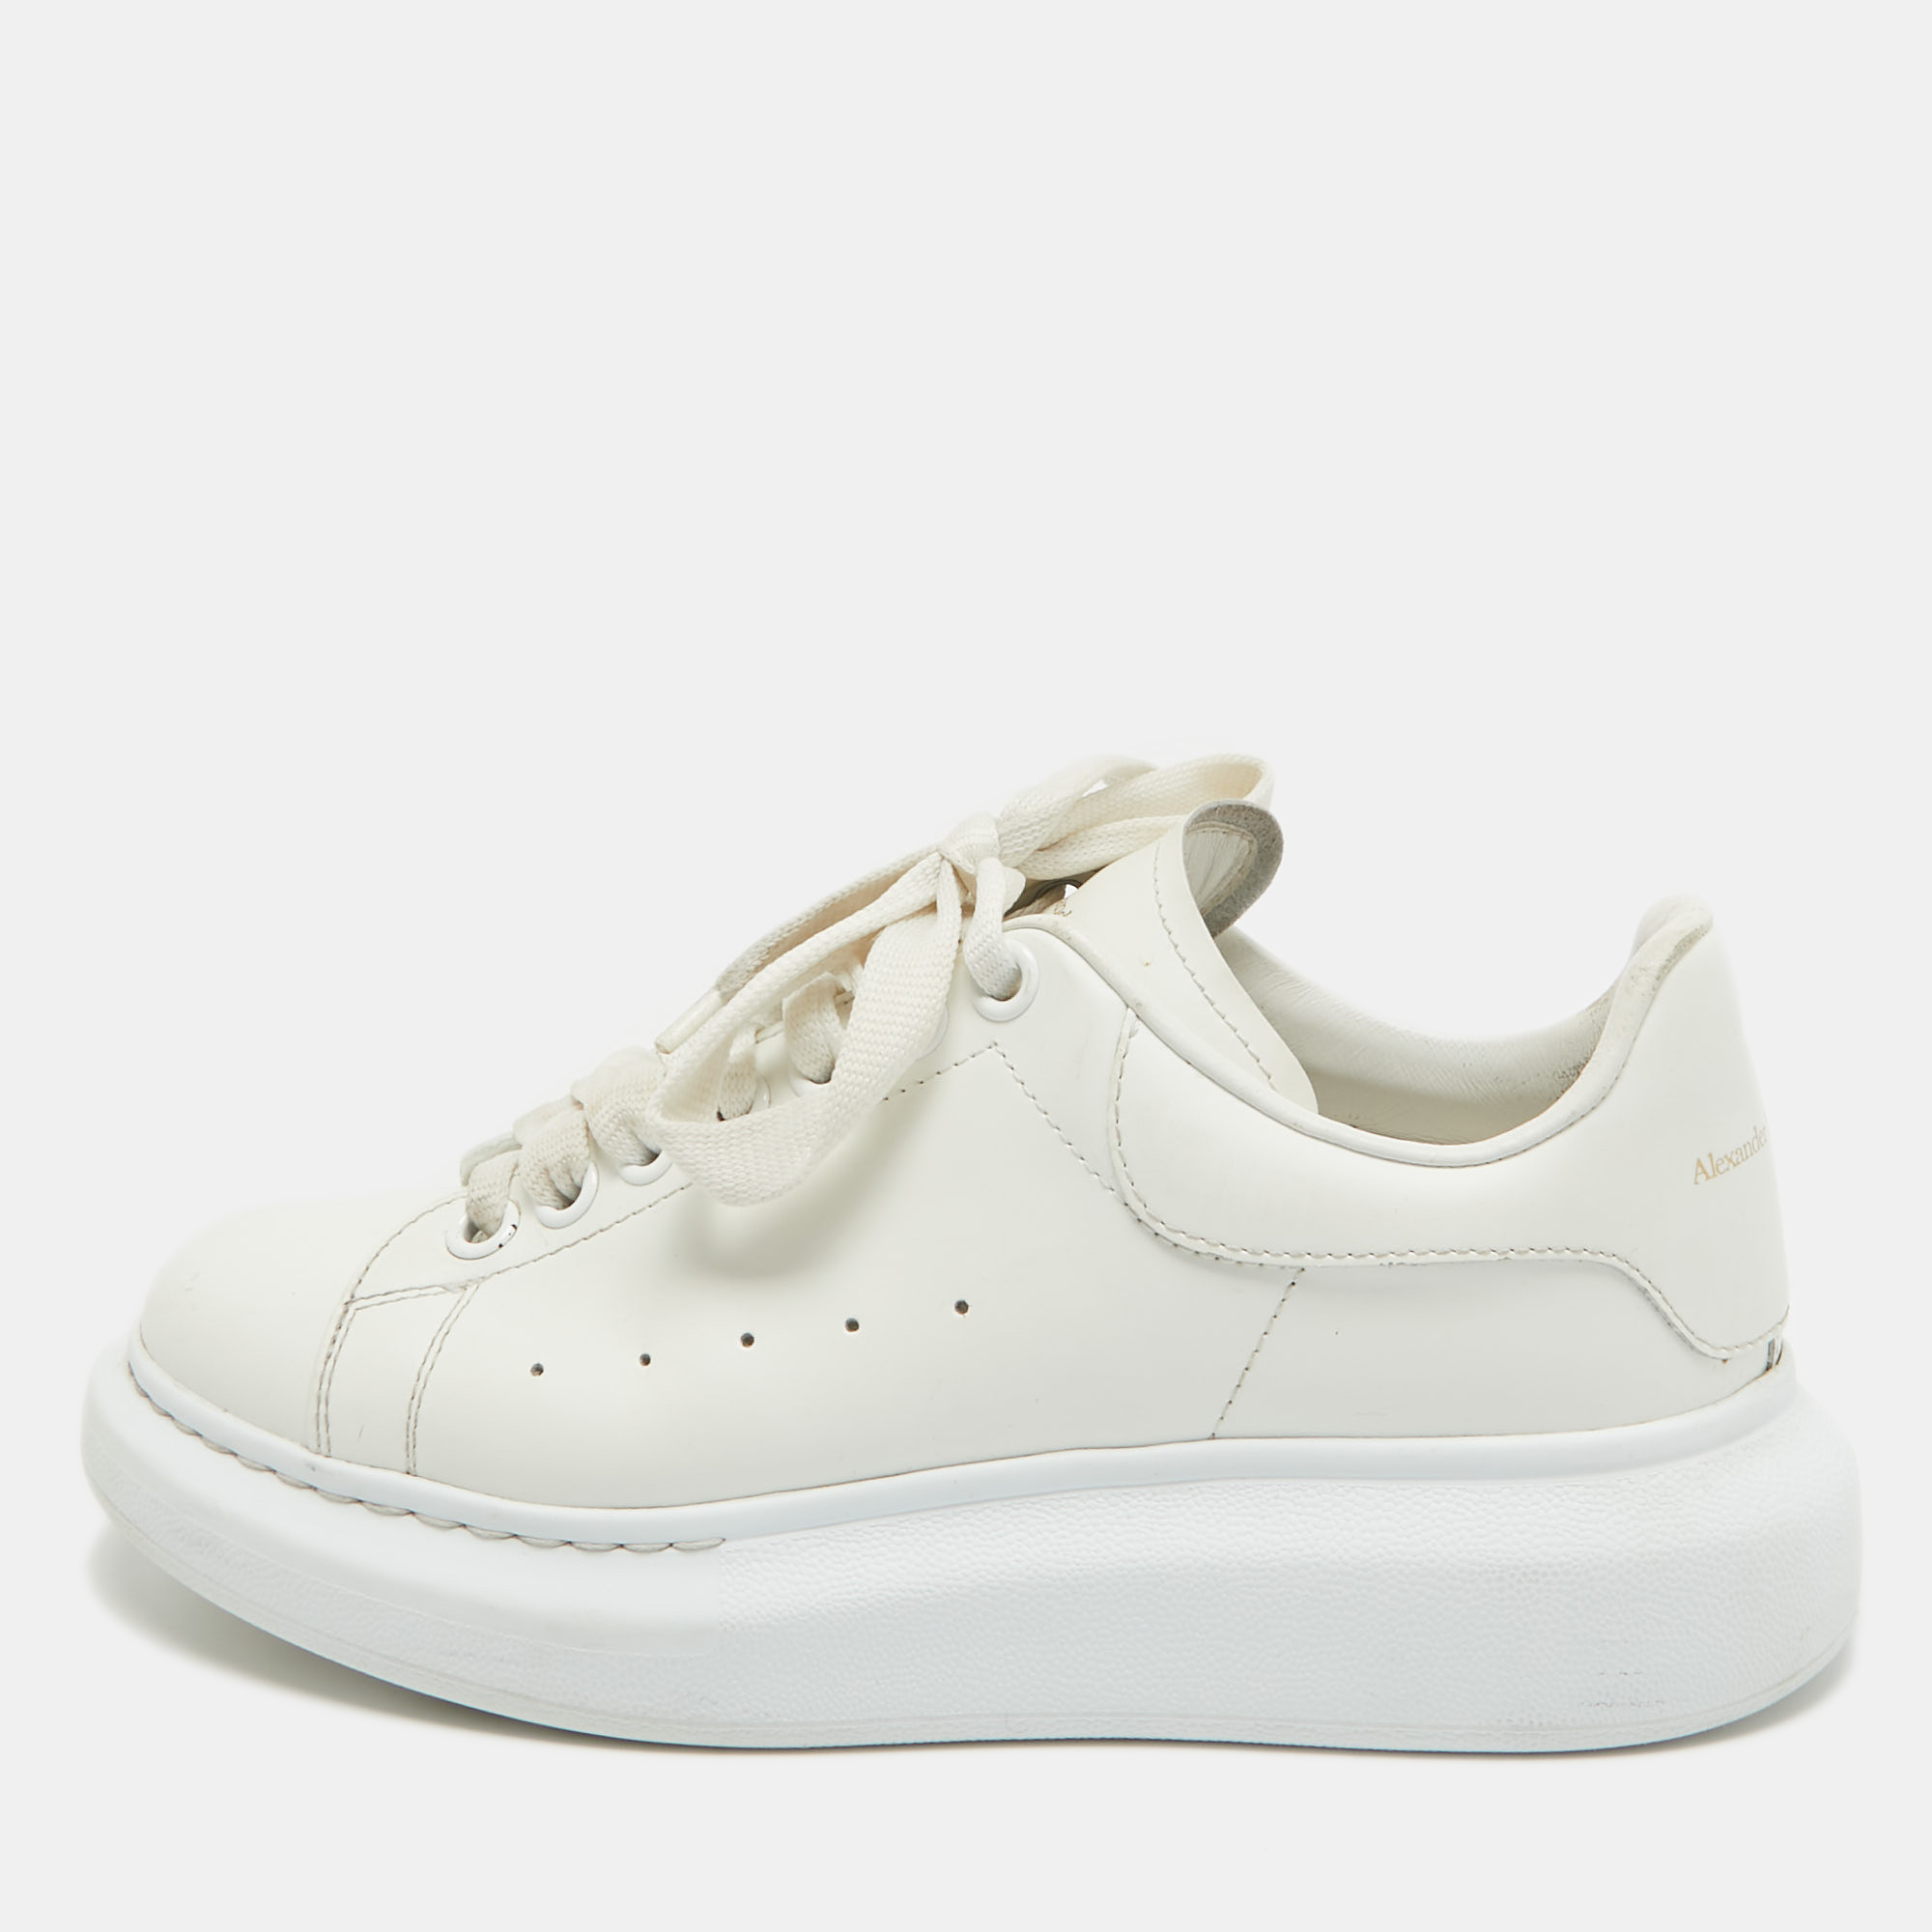 Alexander mcqueen off white leather larry sneakers size 37.5